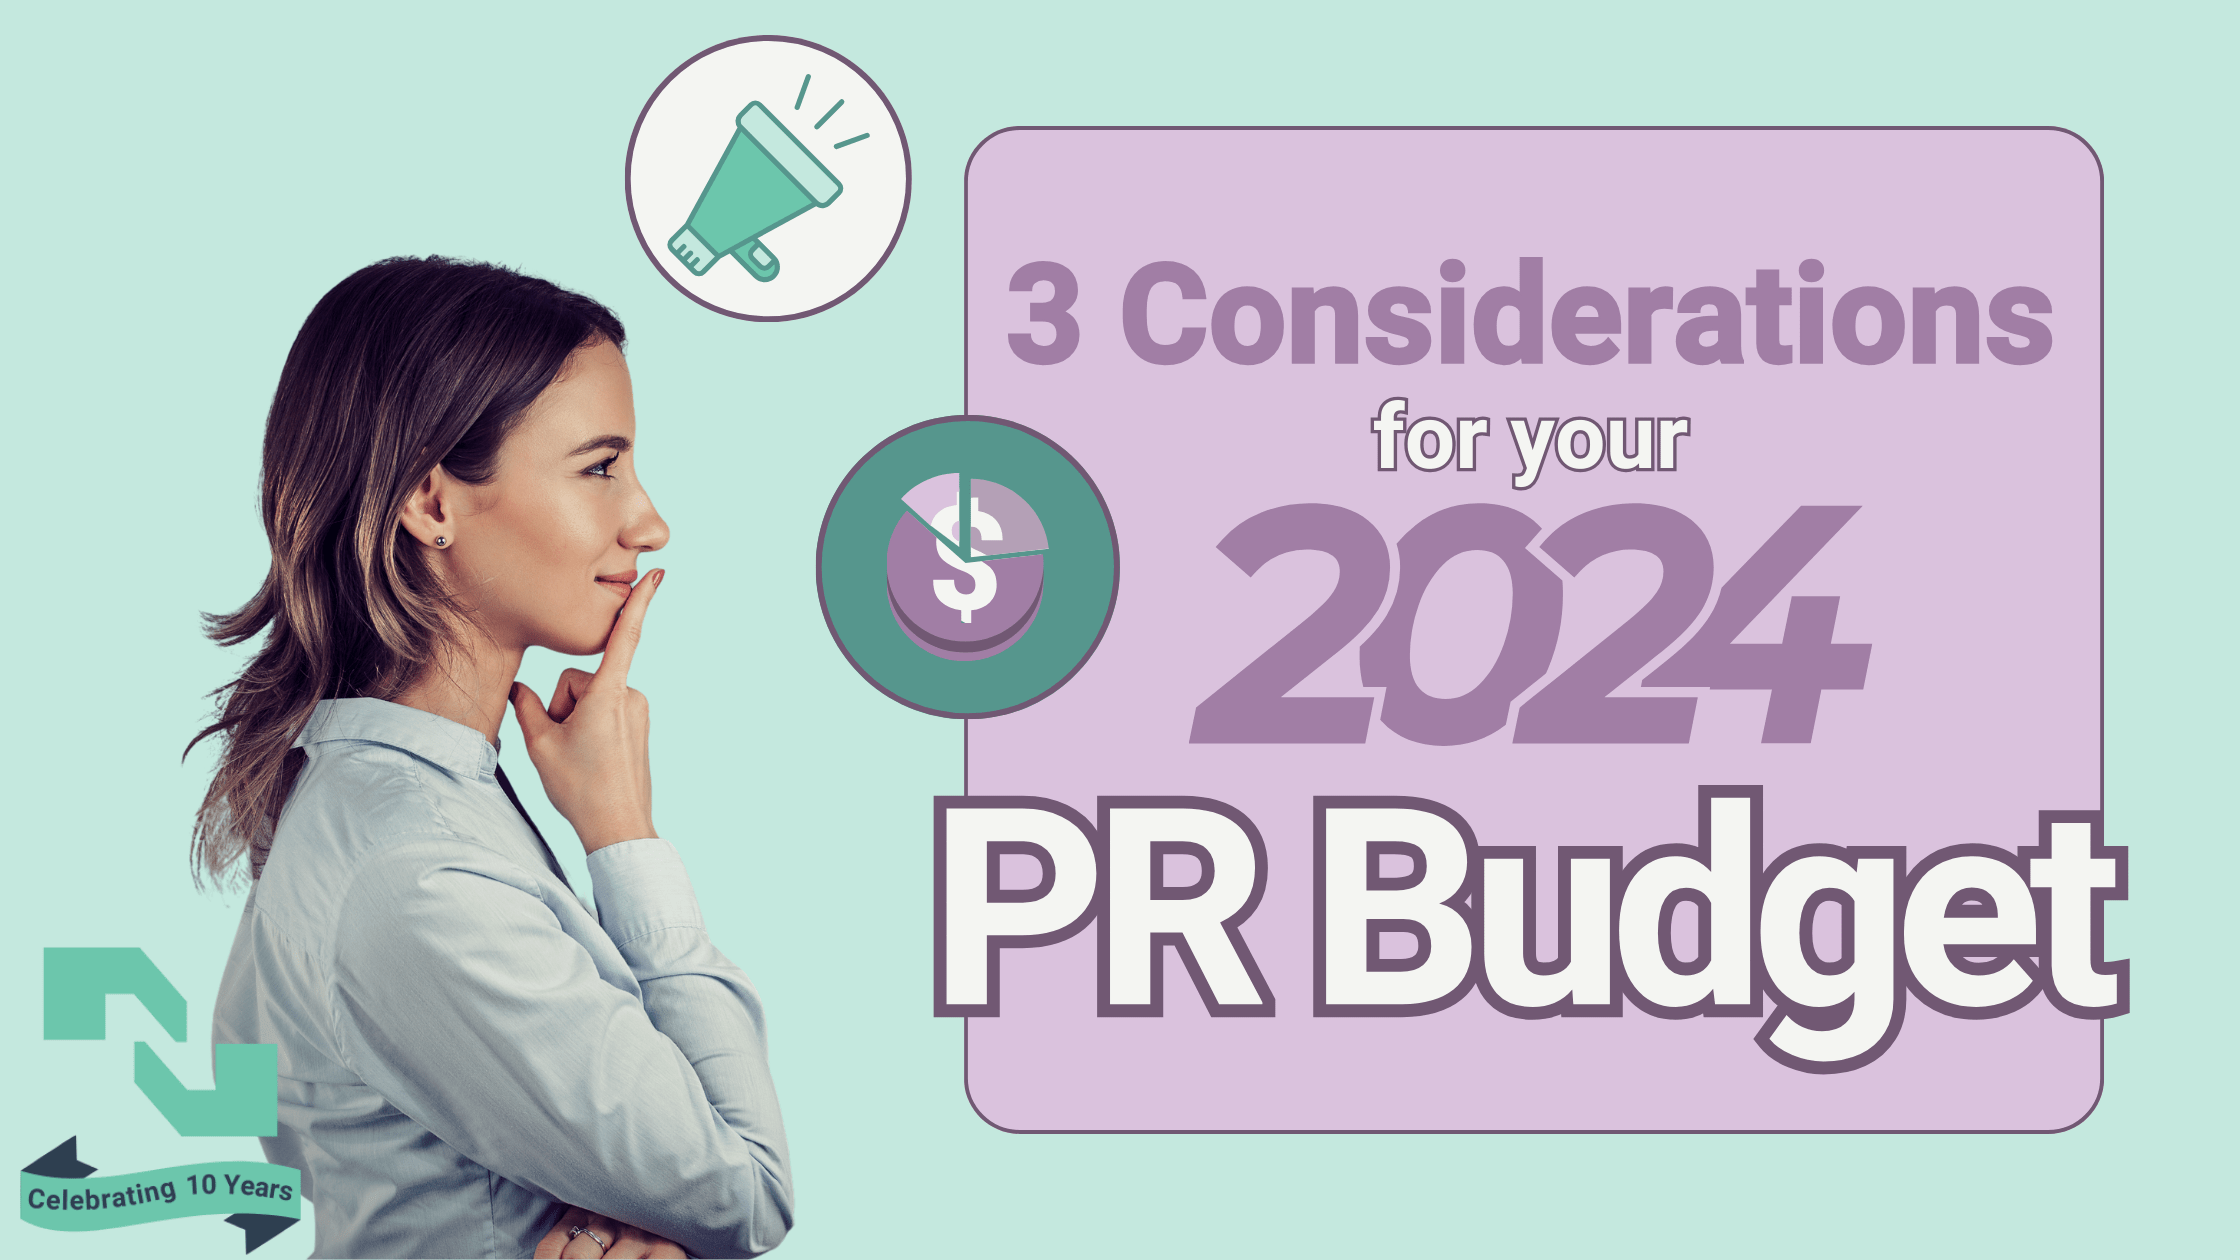 The text, '3 Considerations for your 2024 PR marketing budget' is to the right of a woman shown from her right side who is considering two icon bubbles featuring a megaphone and a budgetary pie chart.